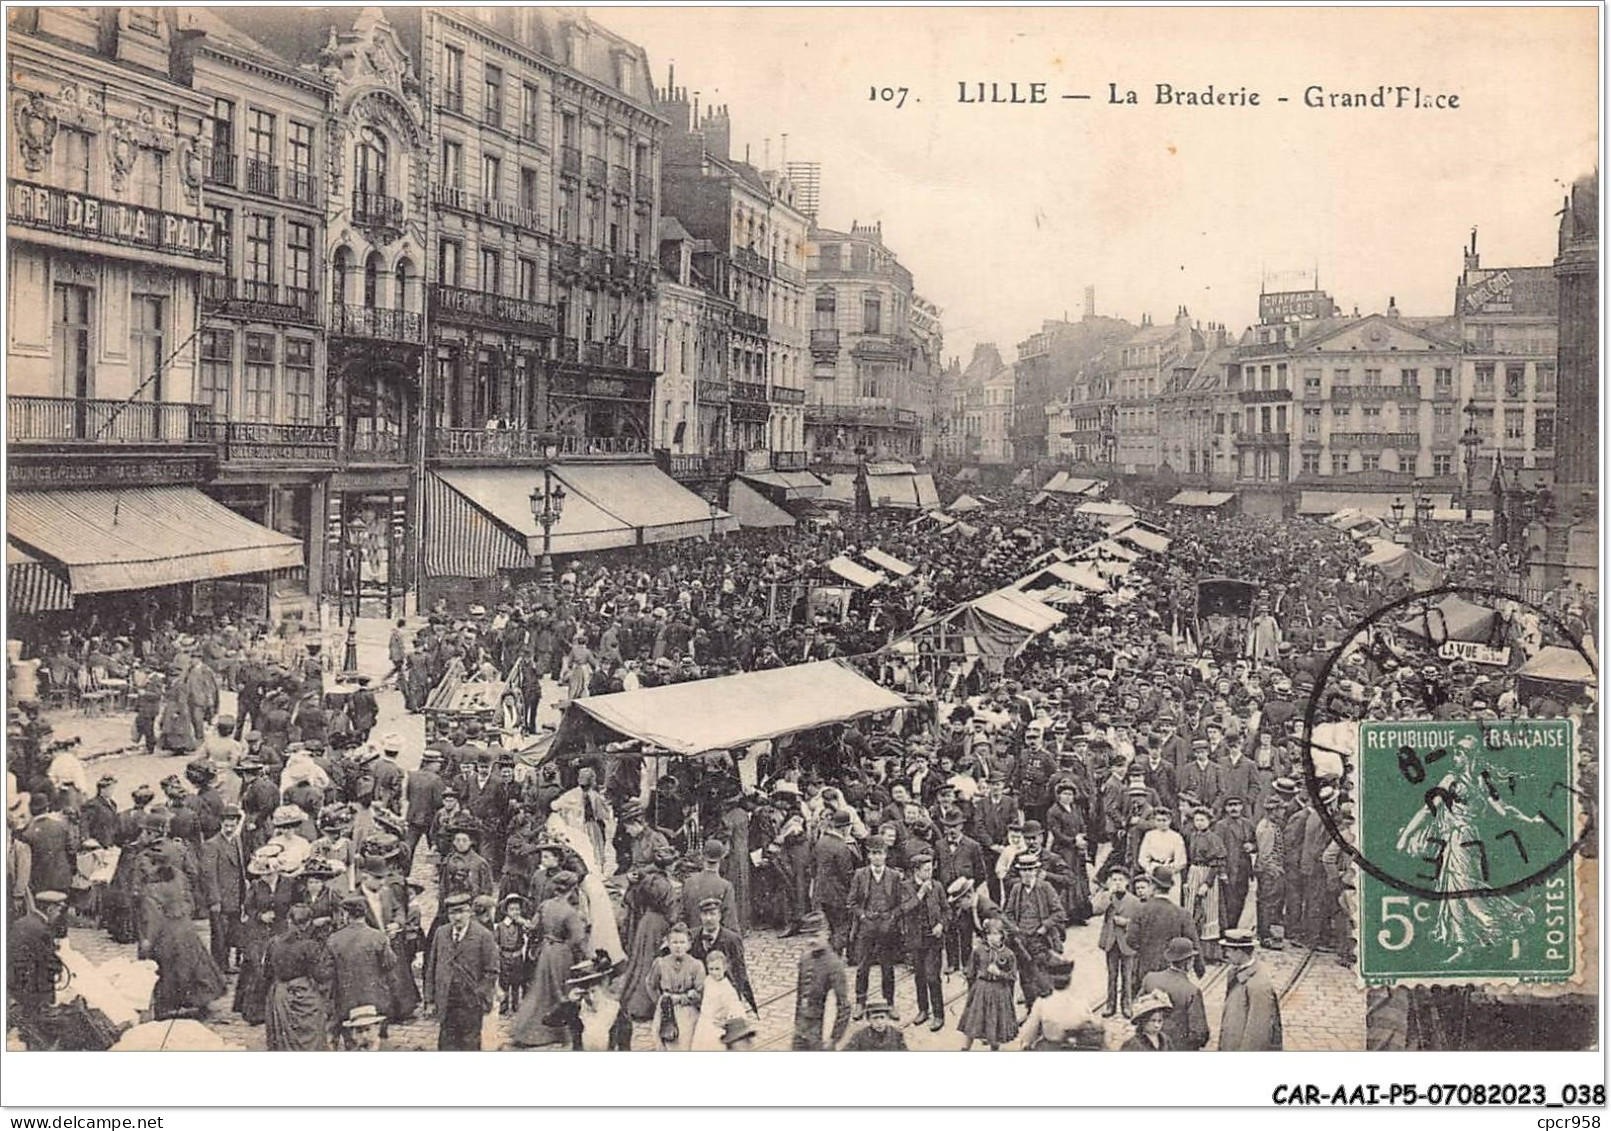 CAR-AAIP5-59-0395 - LILLE - La Braderie - Grand'Place - Lille